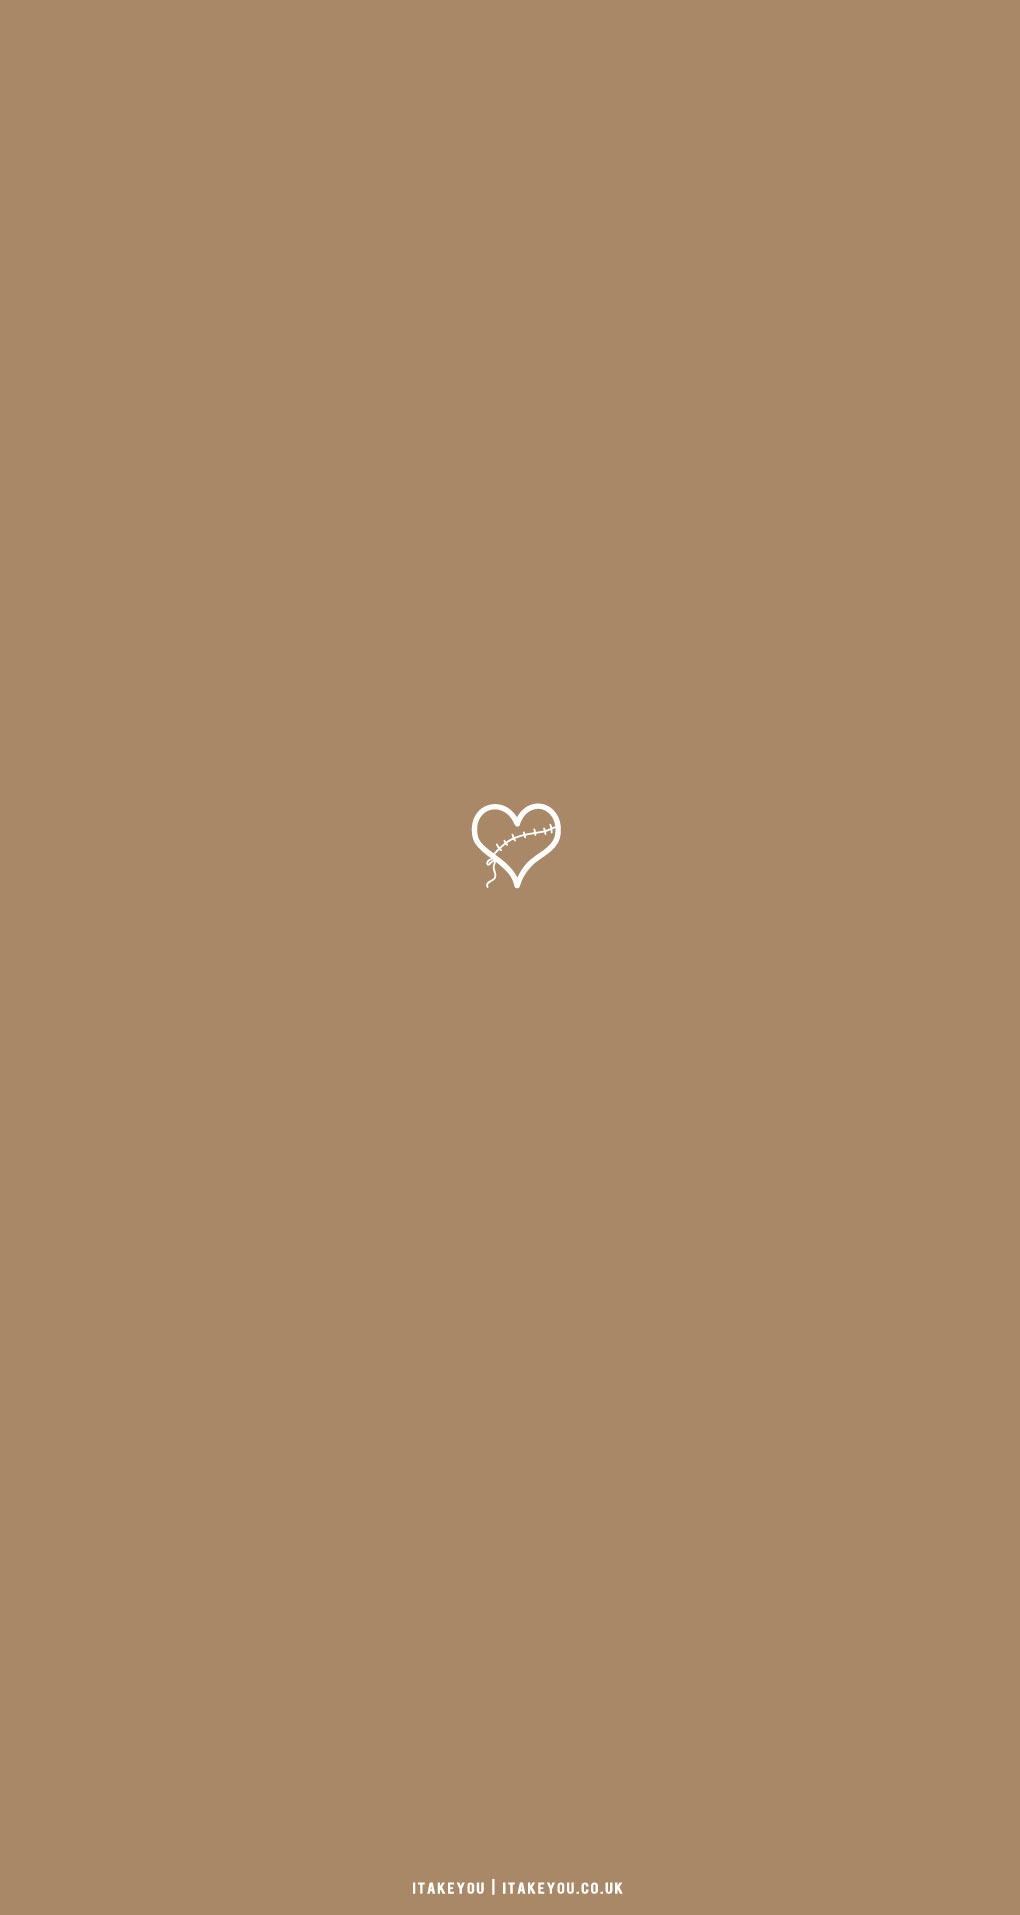 30 Cute Brown Aesthetic Wallpapers for Phone : Stitched Heart Minimalist I  Take You | Wedding Readings | Wedding Ideas | Wedding Dresses | Wedding  Theme